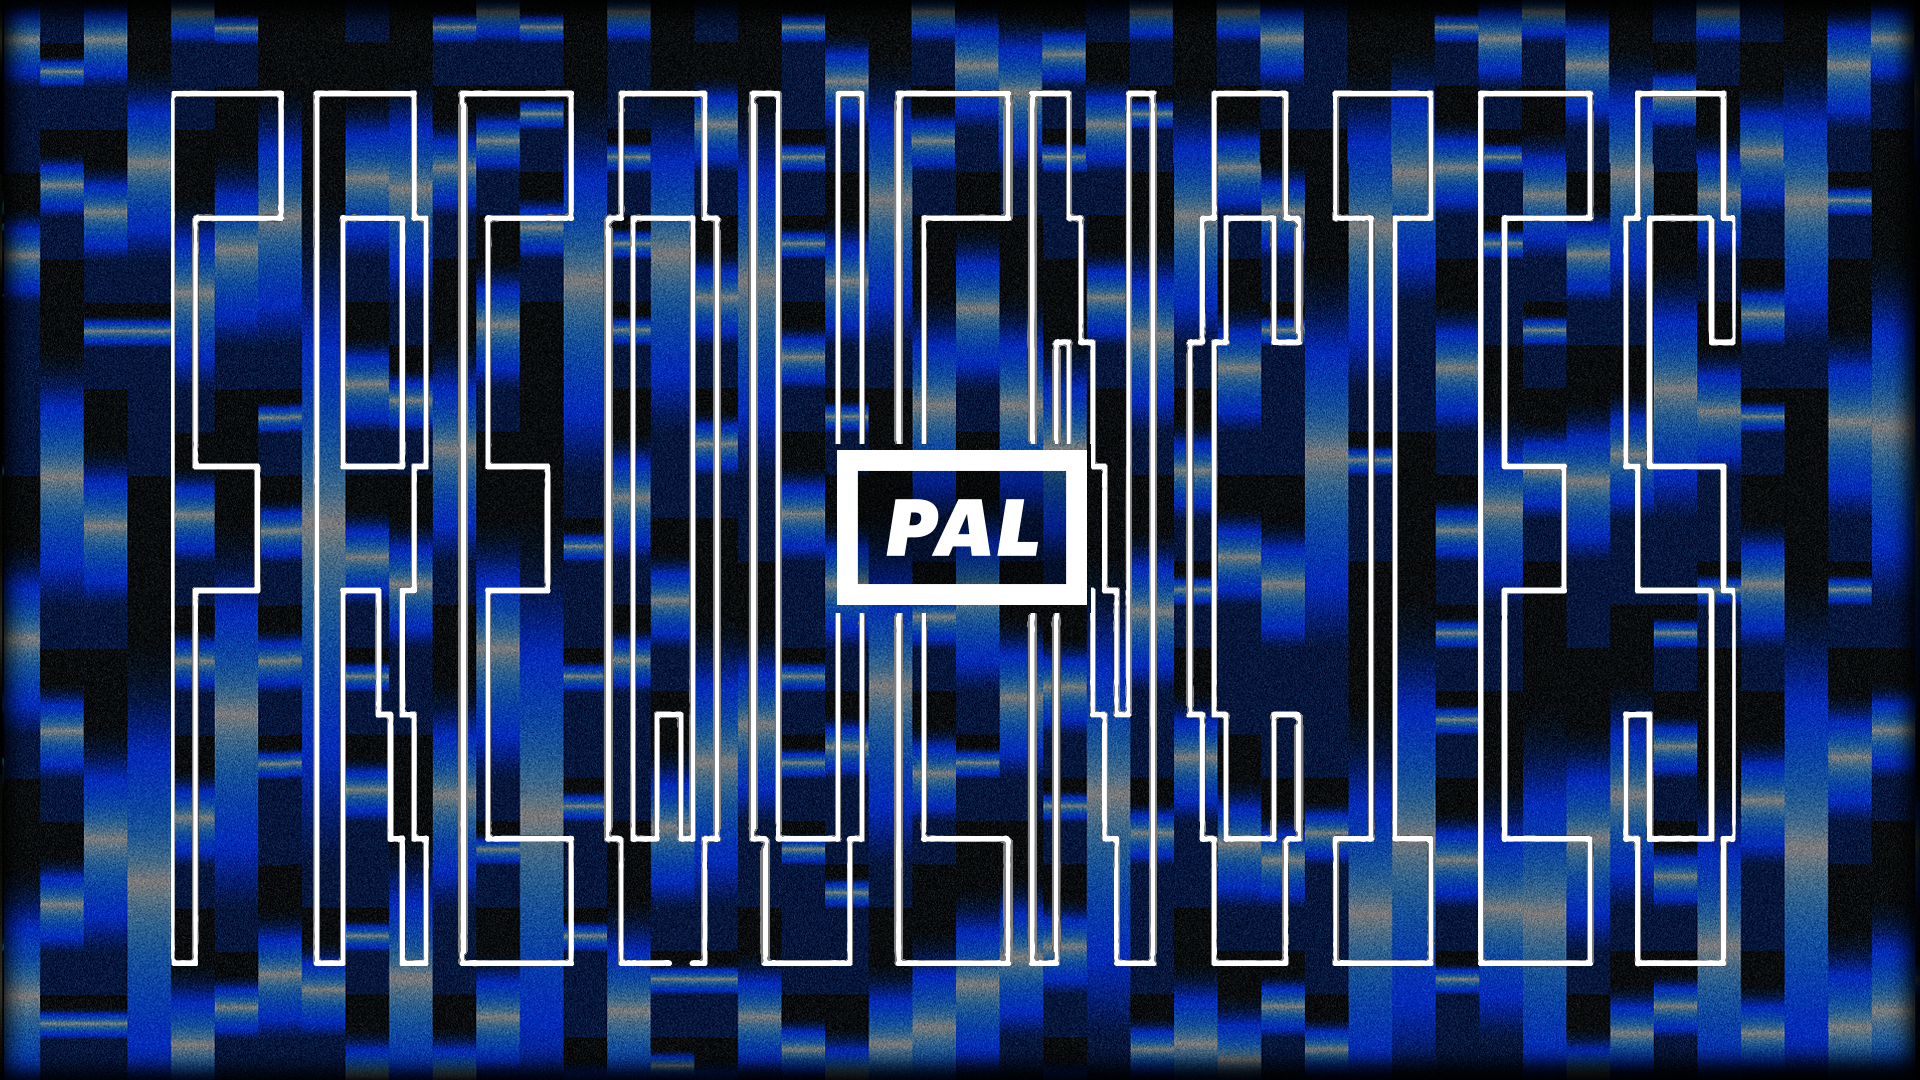 [PAL] FREQUENCIES - フライヤー表